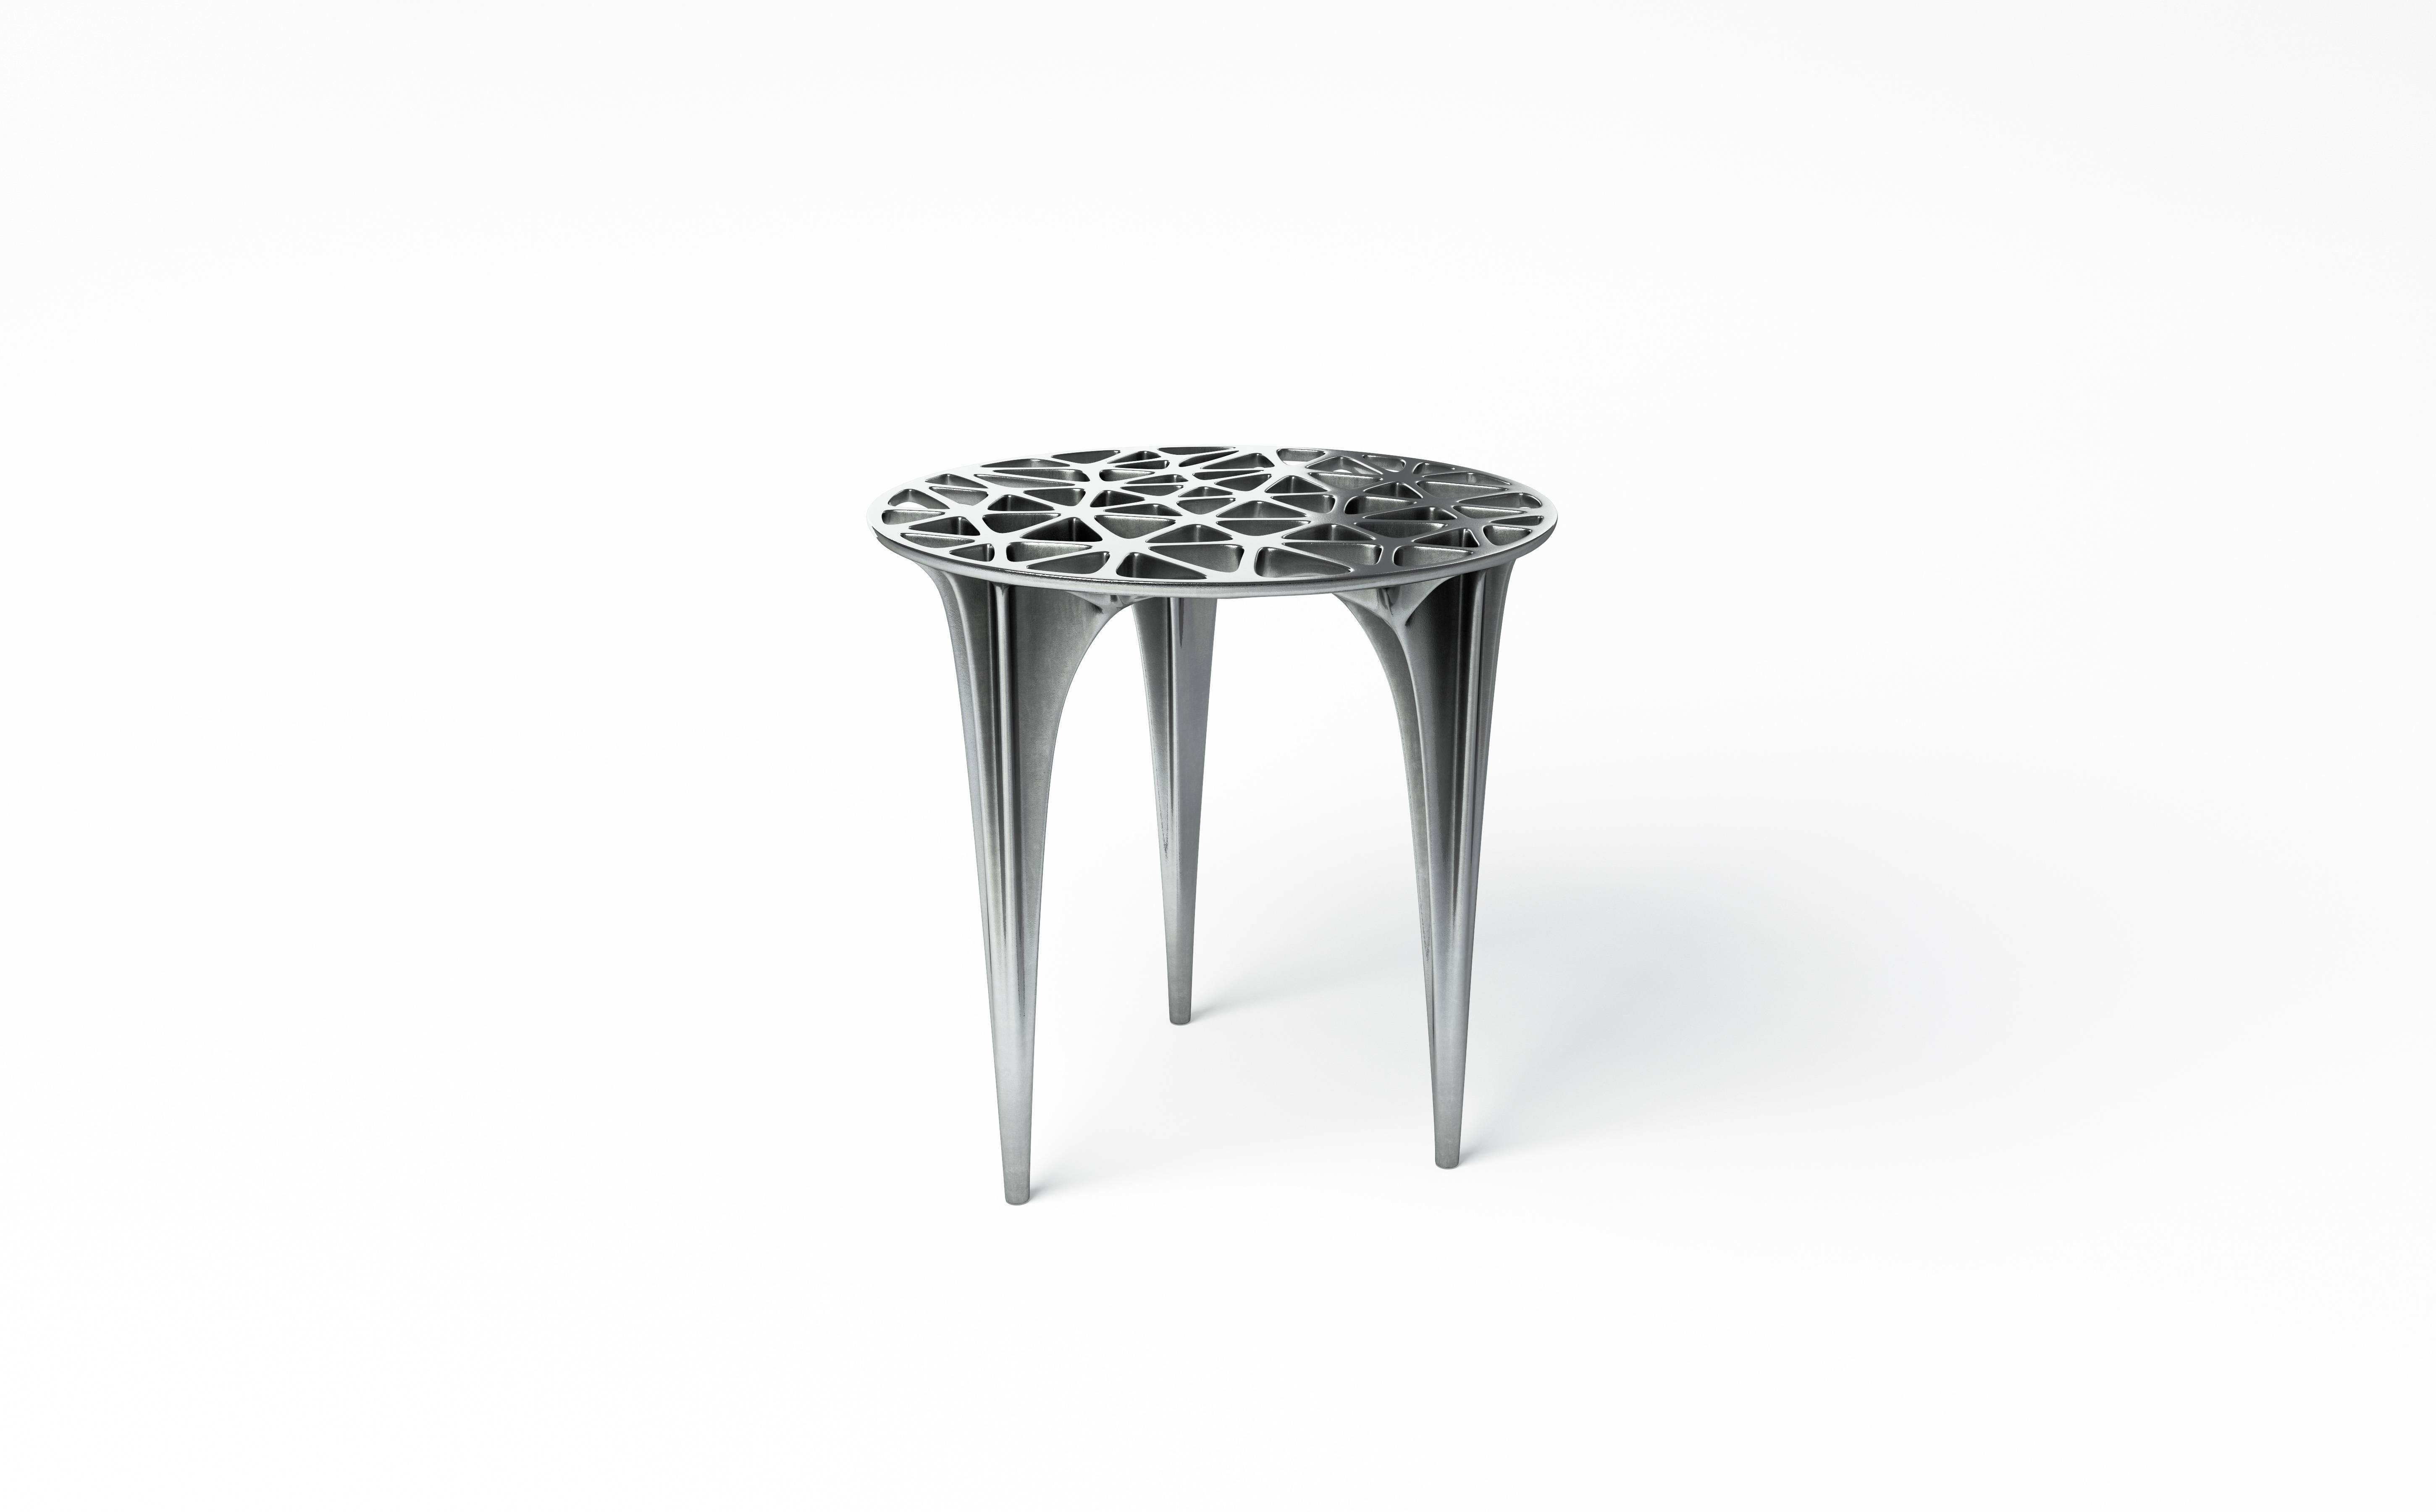 A polished aluminium side table inspired by the infamous red rocks of Sedona; the form references the peaks and plateaus of Sedona’s unique sandstone Formations. This design has a strong Silhouette and delicate, organic triangular